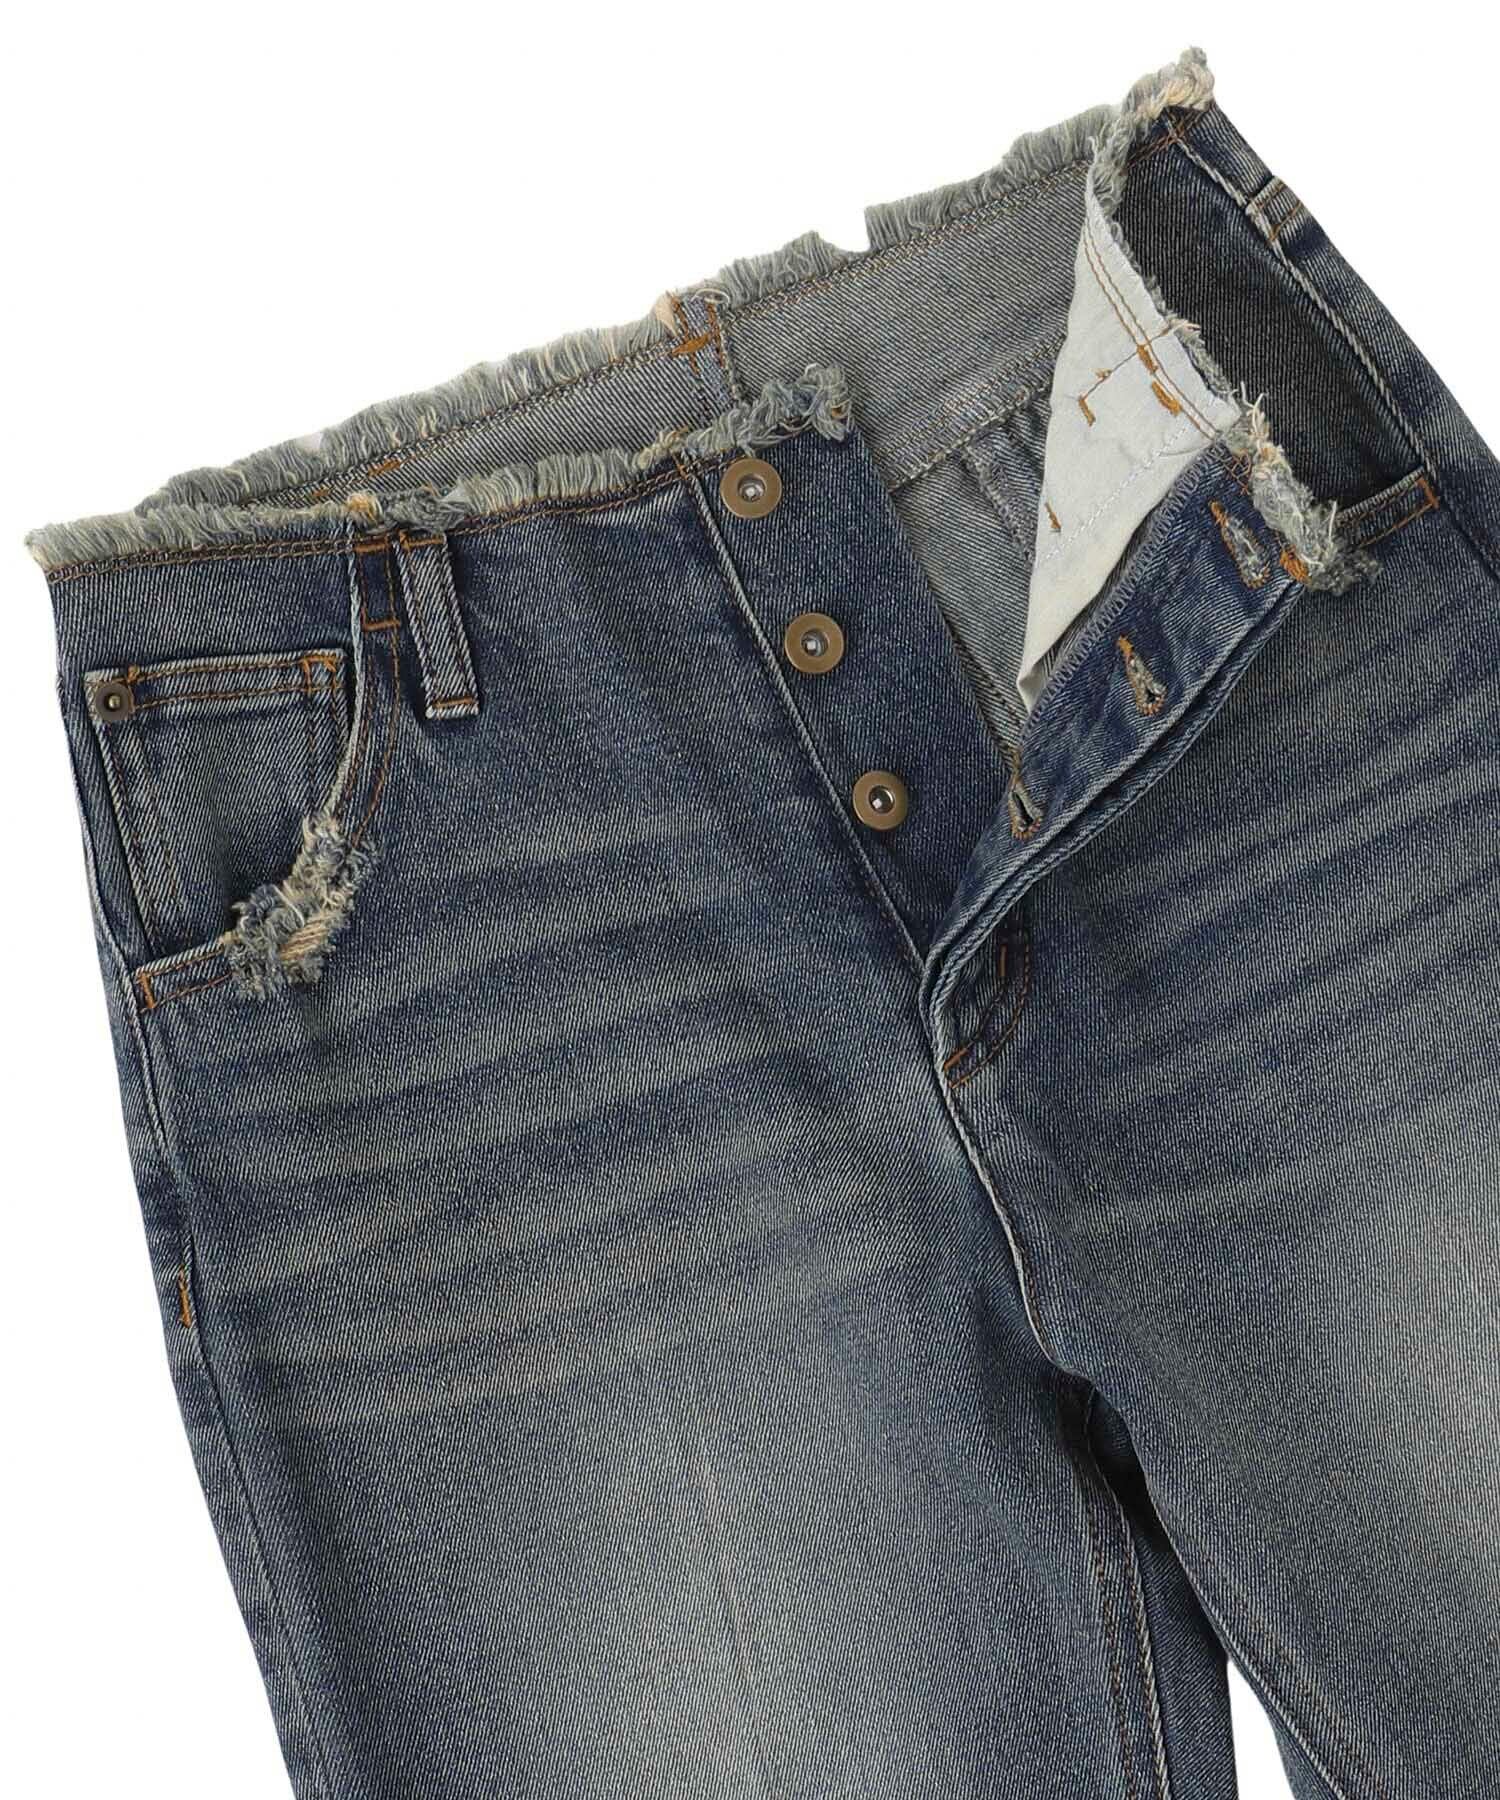 Cut off vintage jeans | ACLENT（アクレント）